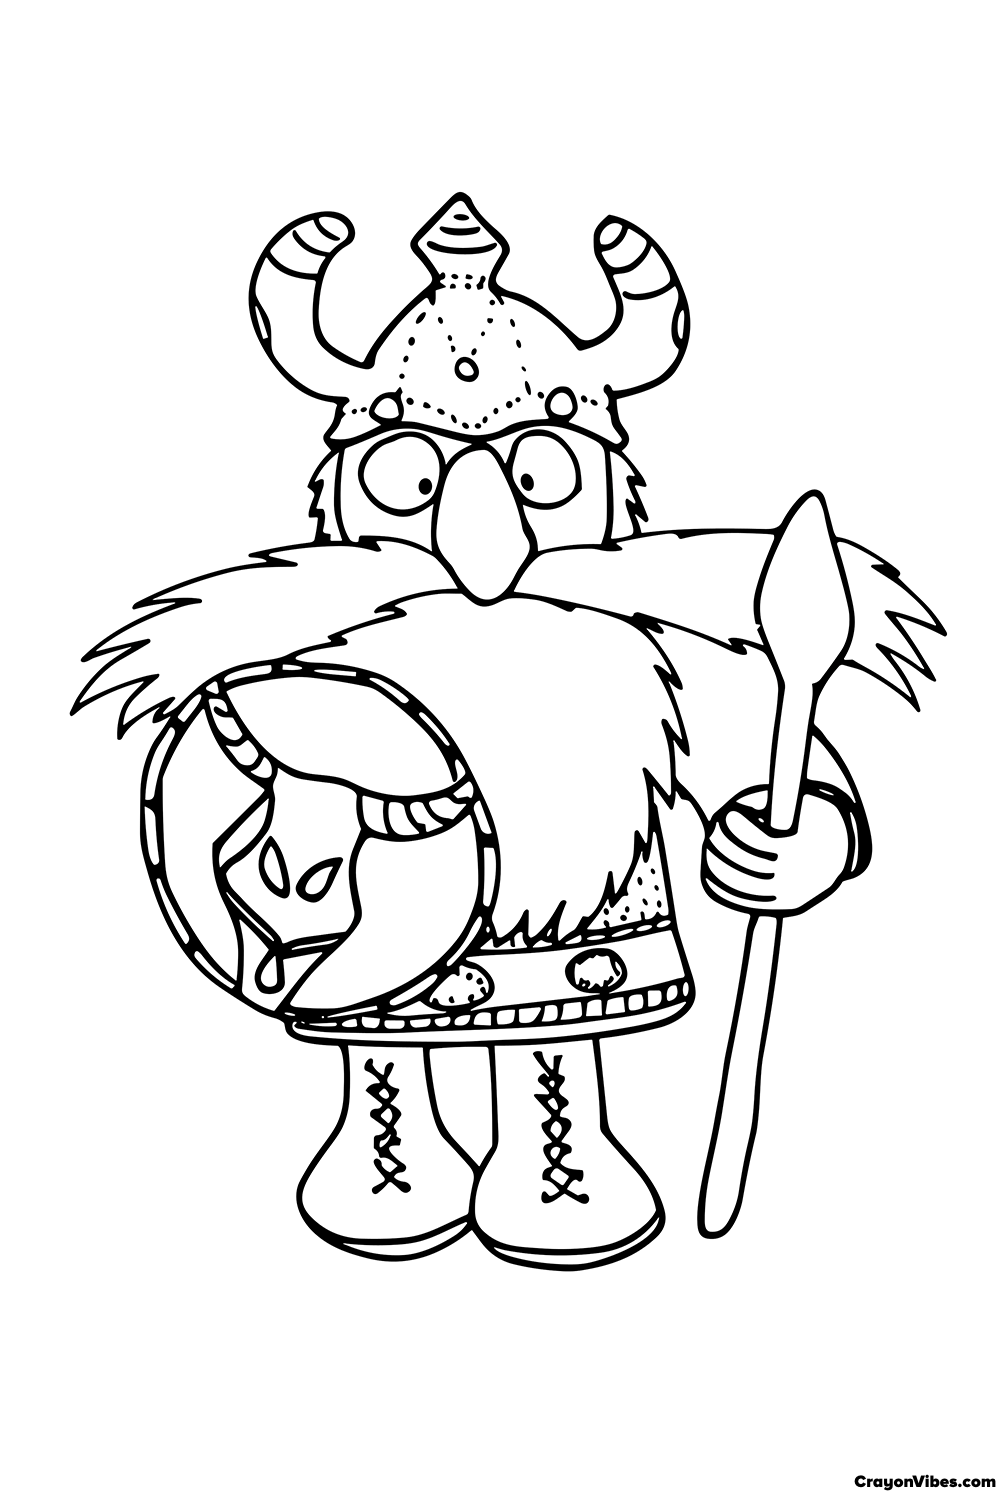 Vikings Coloring Pages to Print for Kids